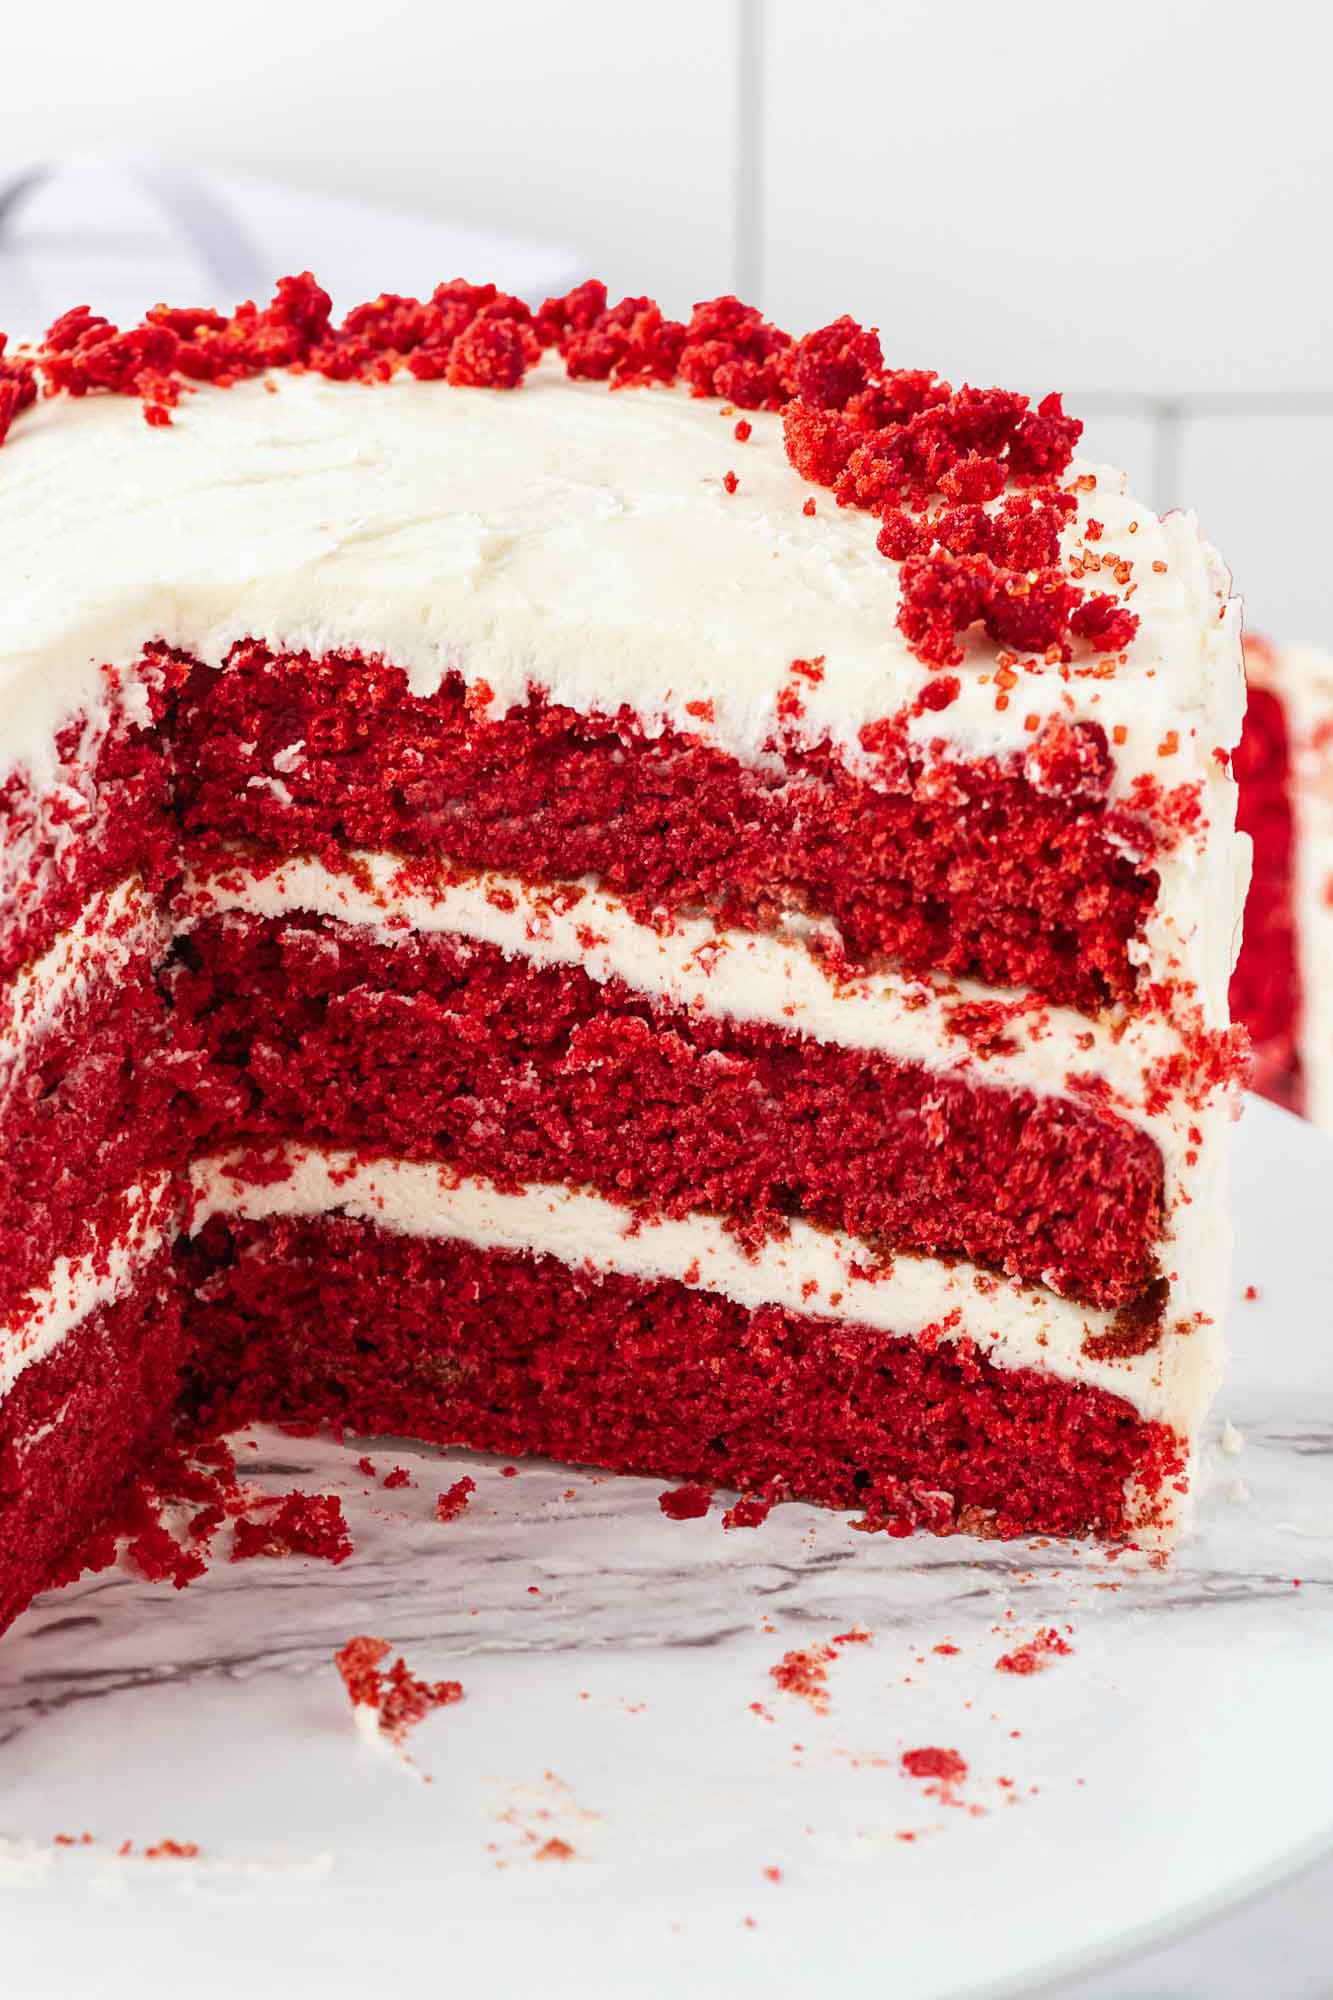 Sliced whole red velvet cake to show the layers